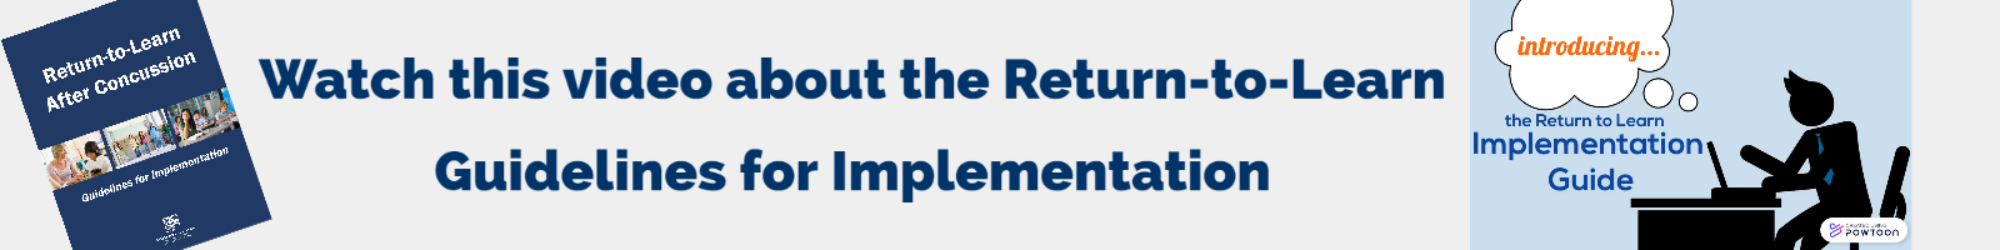 Watch this video about the Return-to-Learn Guidelines for Implementation